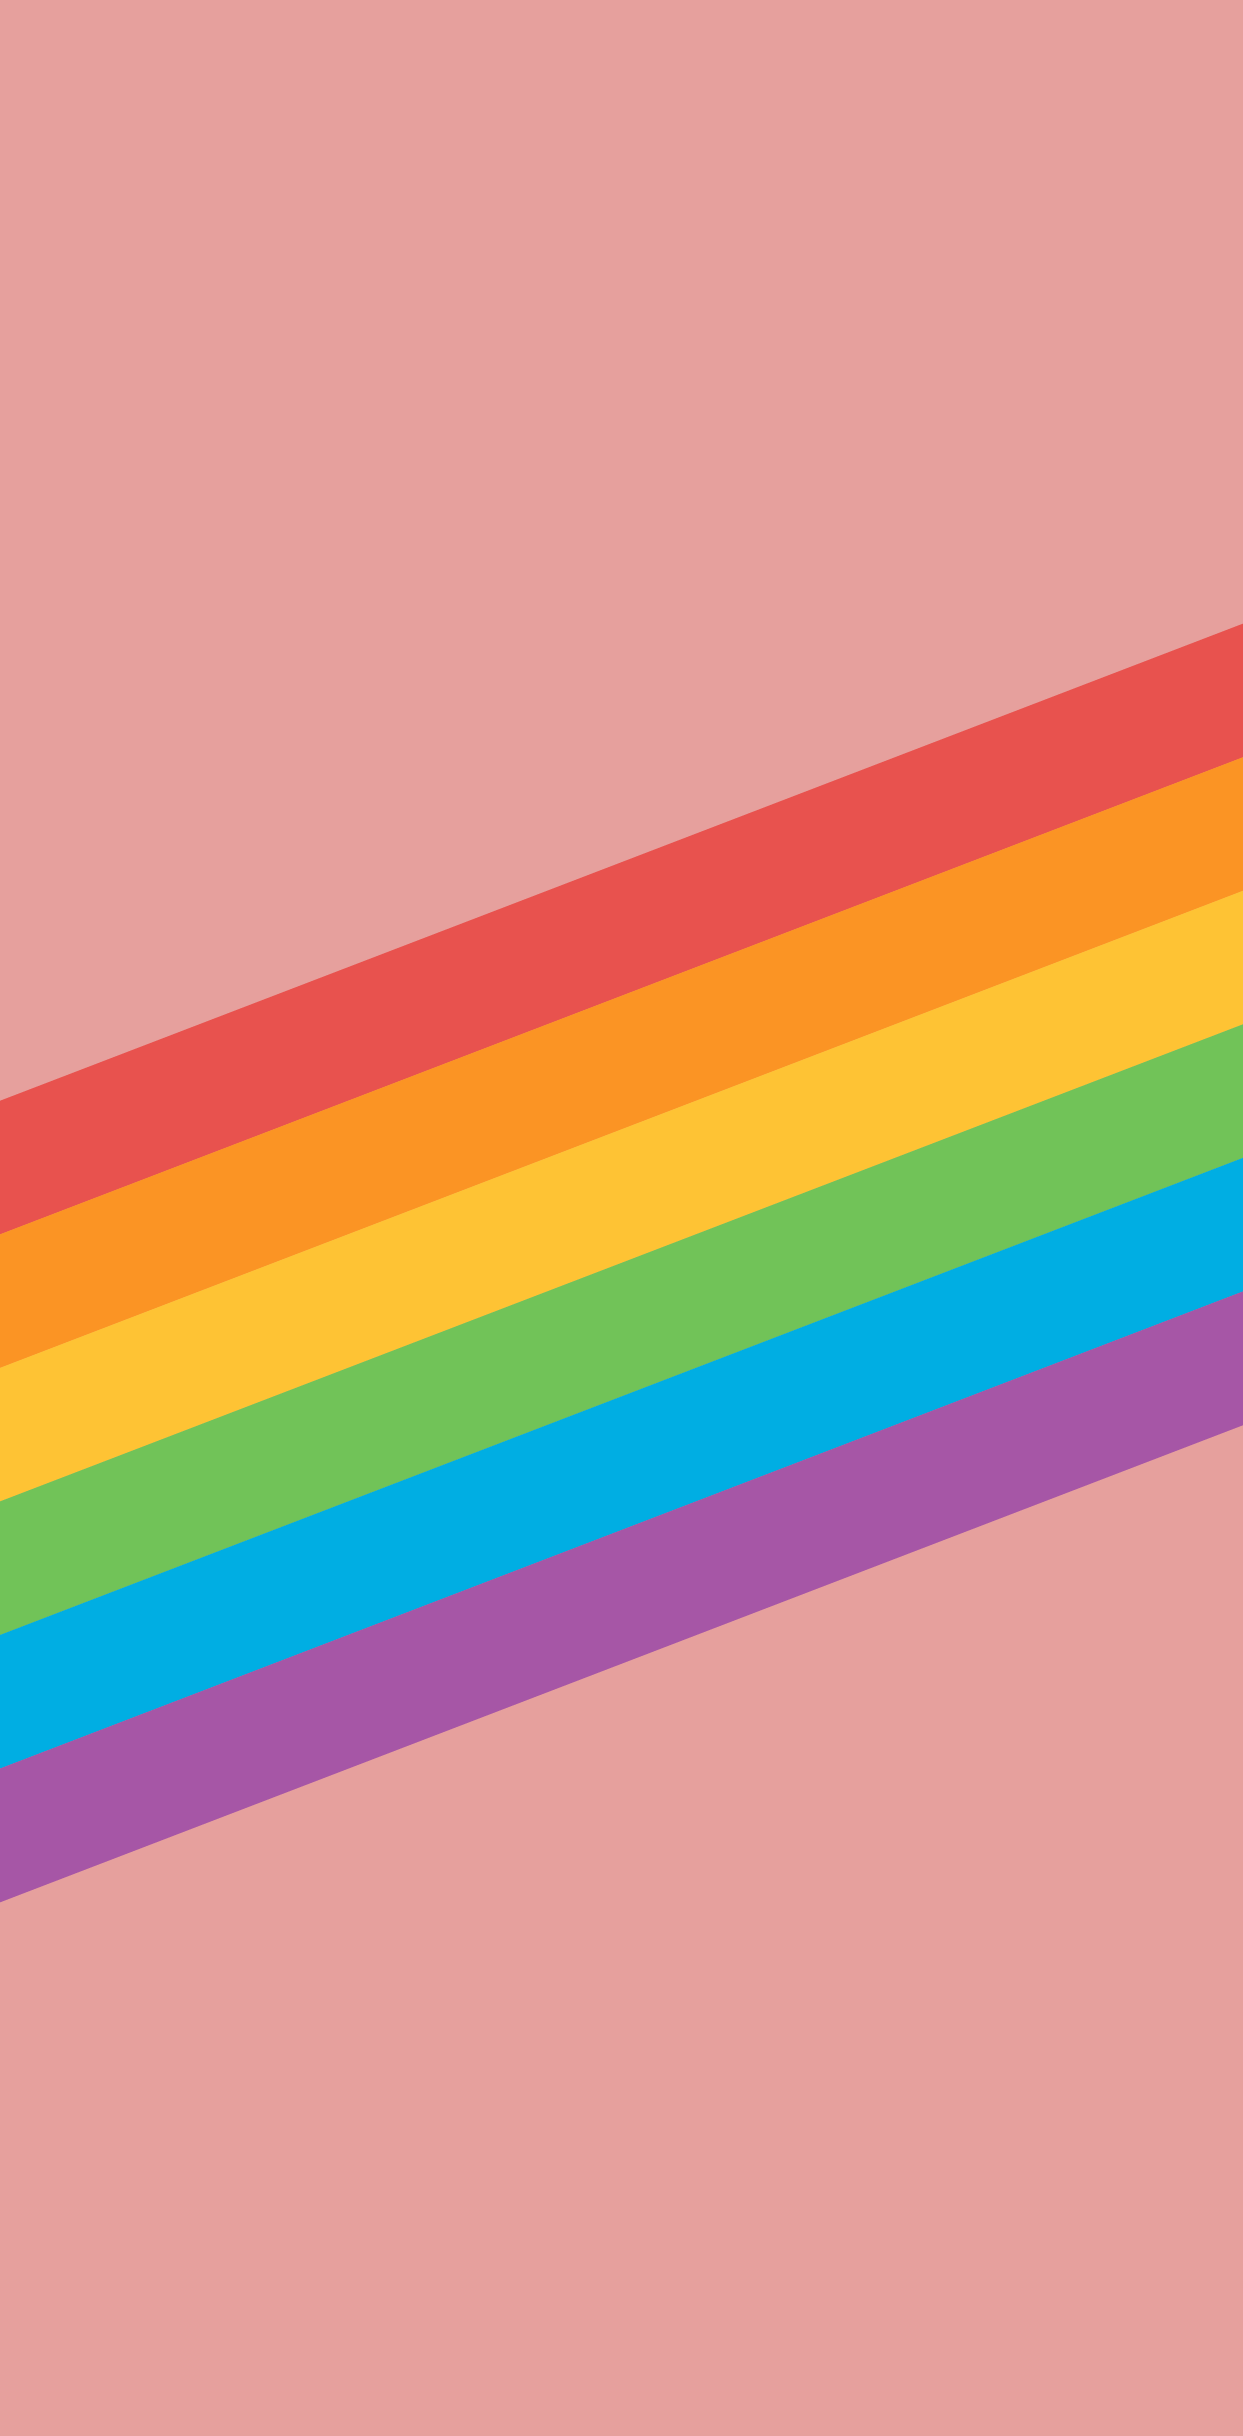 I wanted to use a LGBTQ my parents couldnt understand So I decided to  draw the mlm flag with little to no effort Here you can use it if you  want LGBT